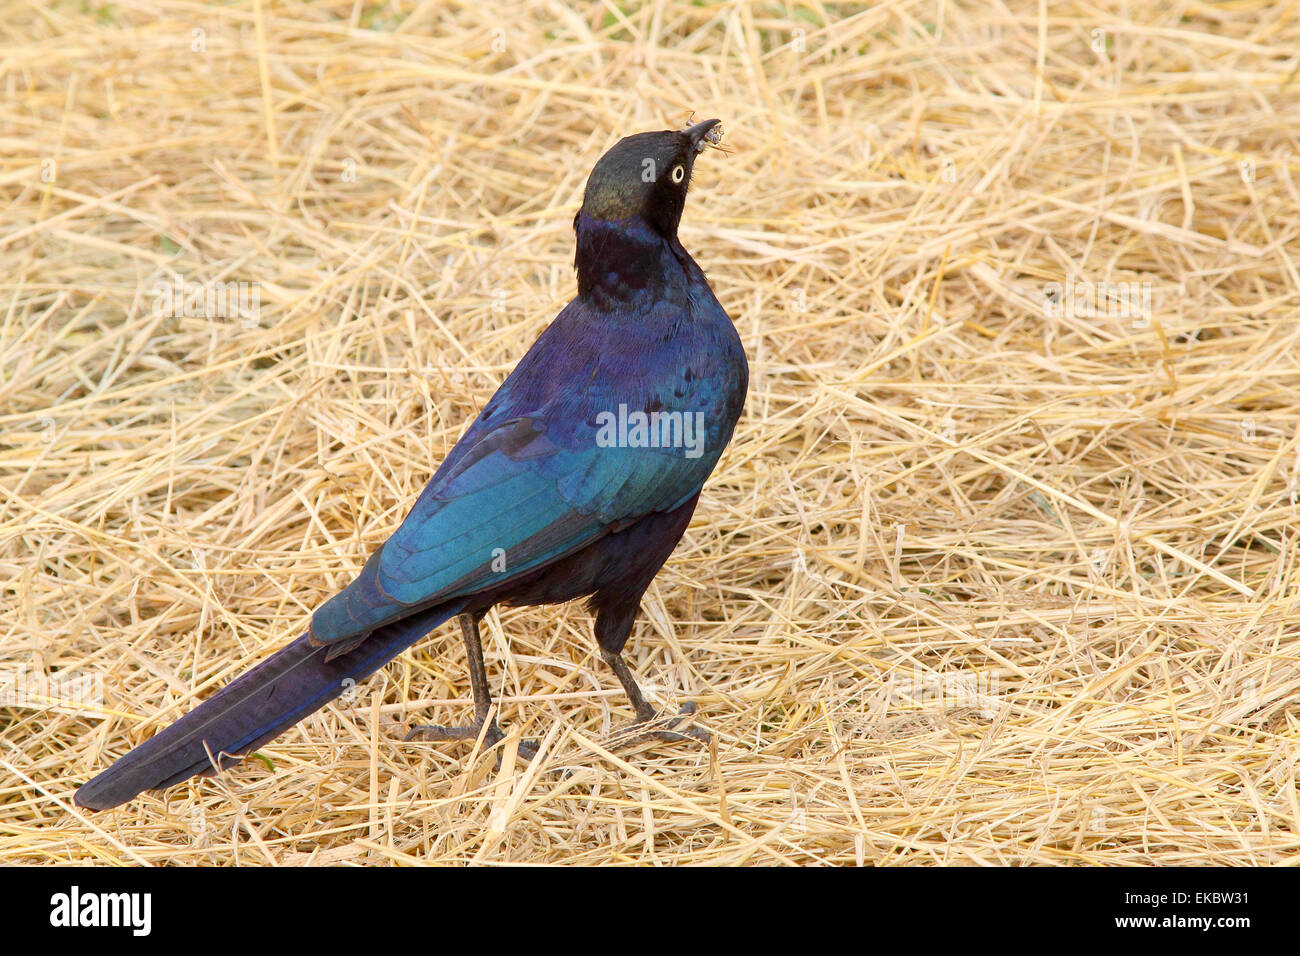 An african bird known as Cape starling or red-shouldered glossy-starling or Cape glossy starling, Lamprotornis nitens, on the gr Stock Photo